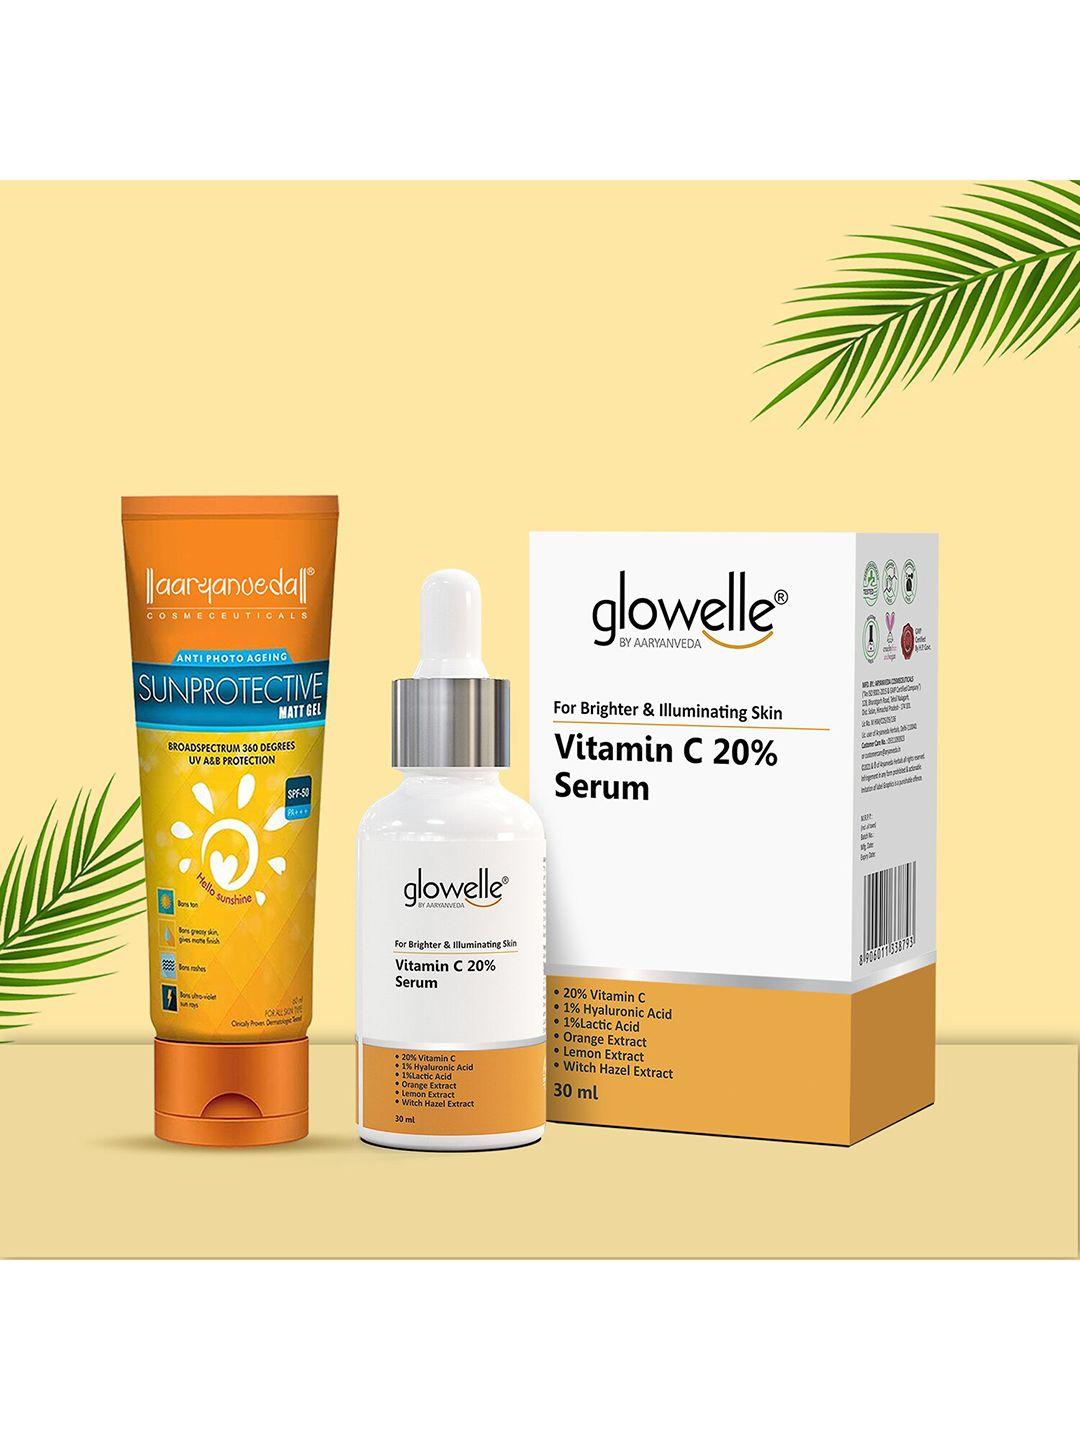 aryanveda-sunscreen-spf-50-pa+++-with-glowelle-vitamin-c-face-serum-for-illuminated-skin-90g-each